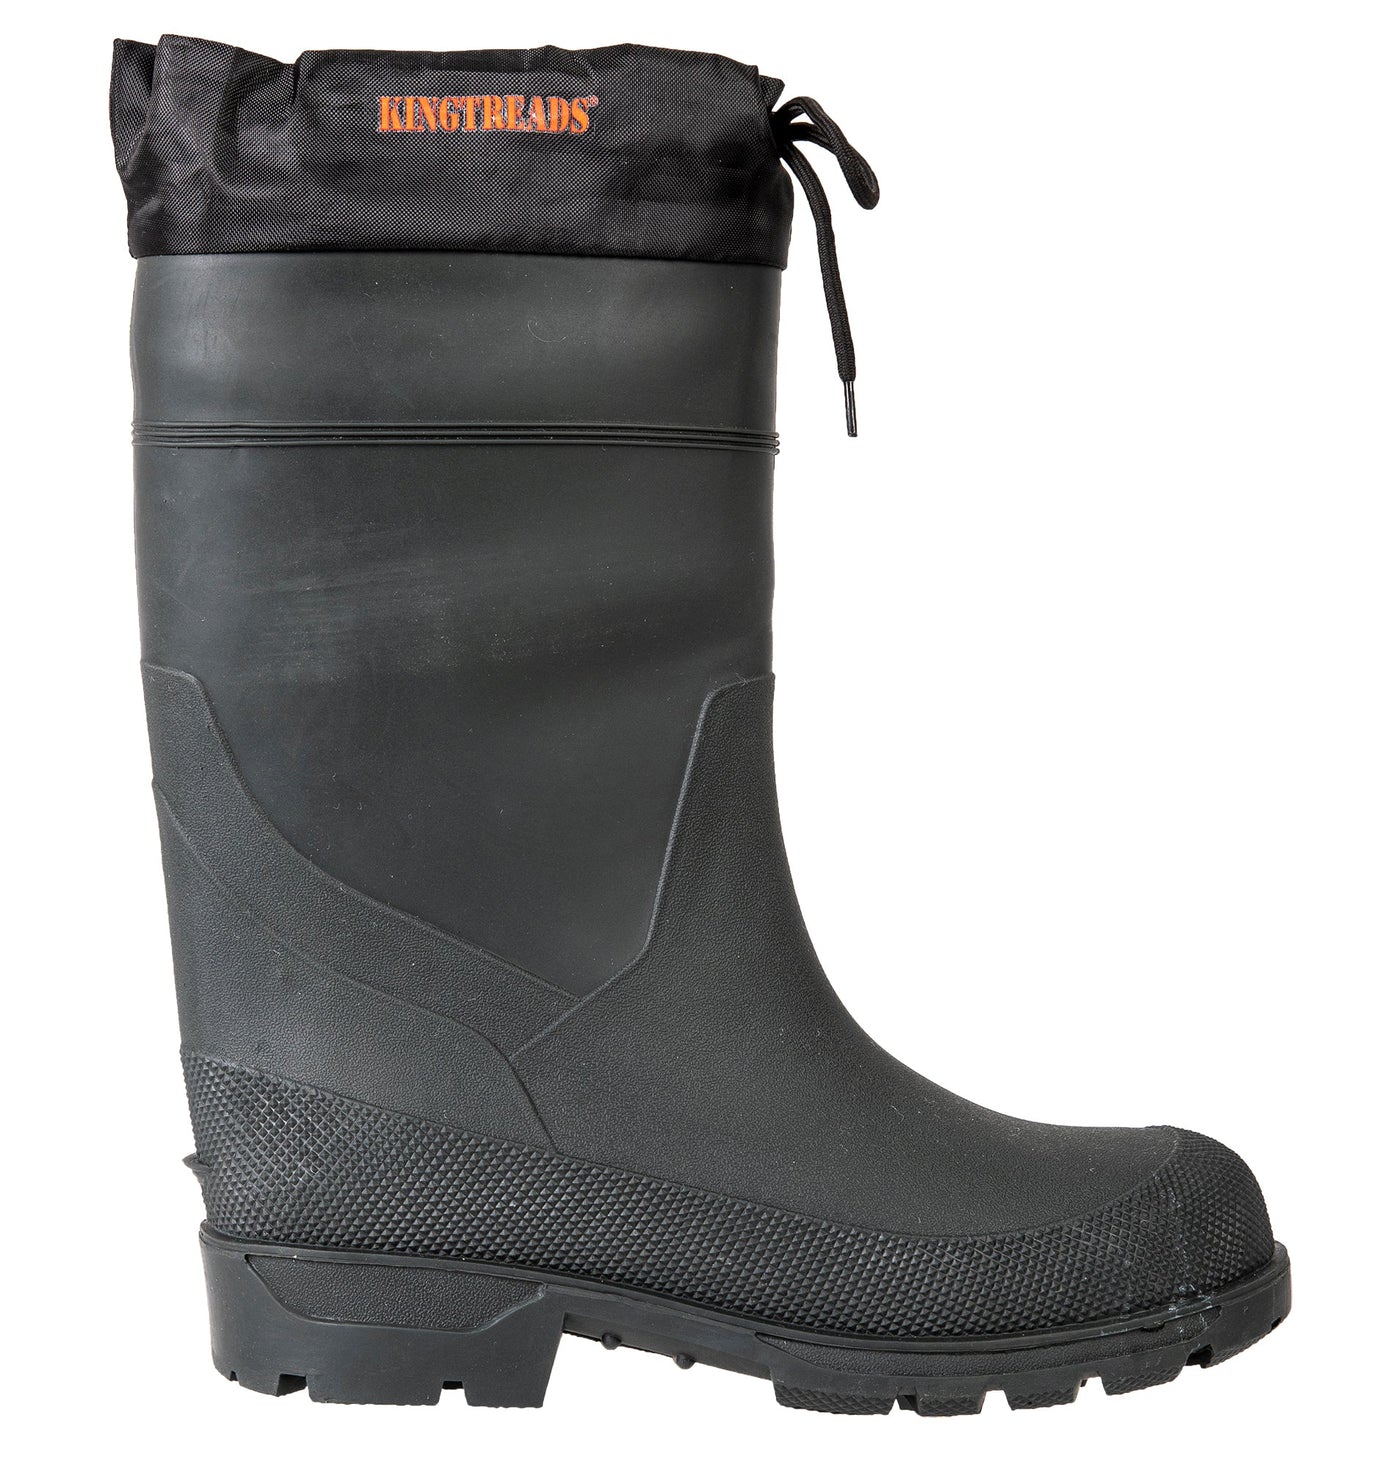 Felt hunting fishing rubber boot -40°C Richmond by Kingtreads